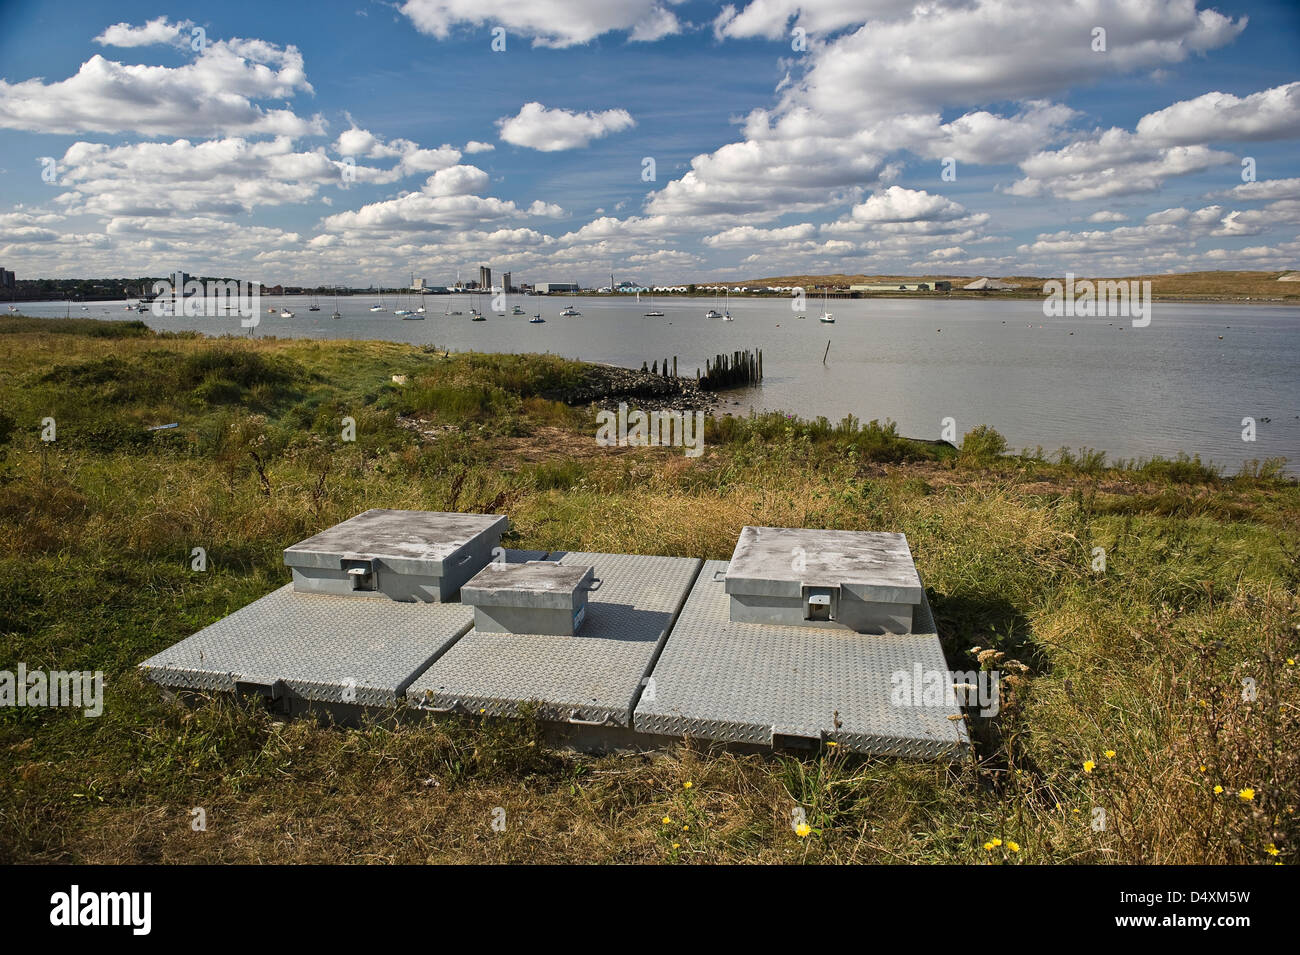 Flood defense pumps on the side of the River Thames near Erith, Kent, UK Stock Photo